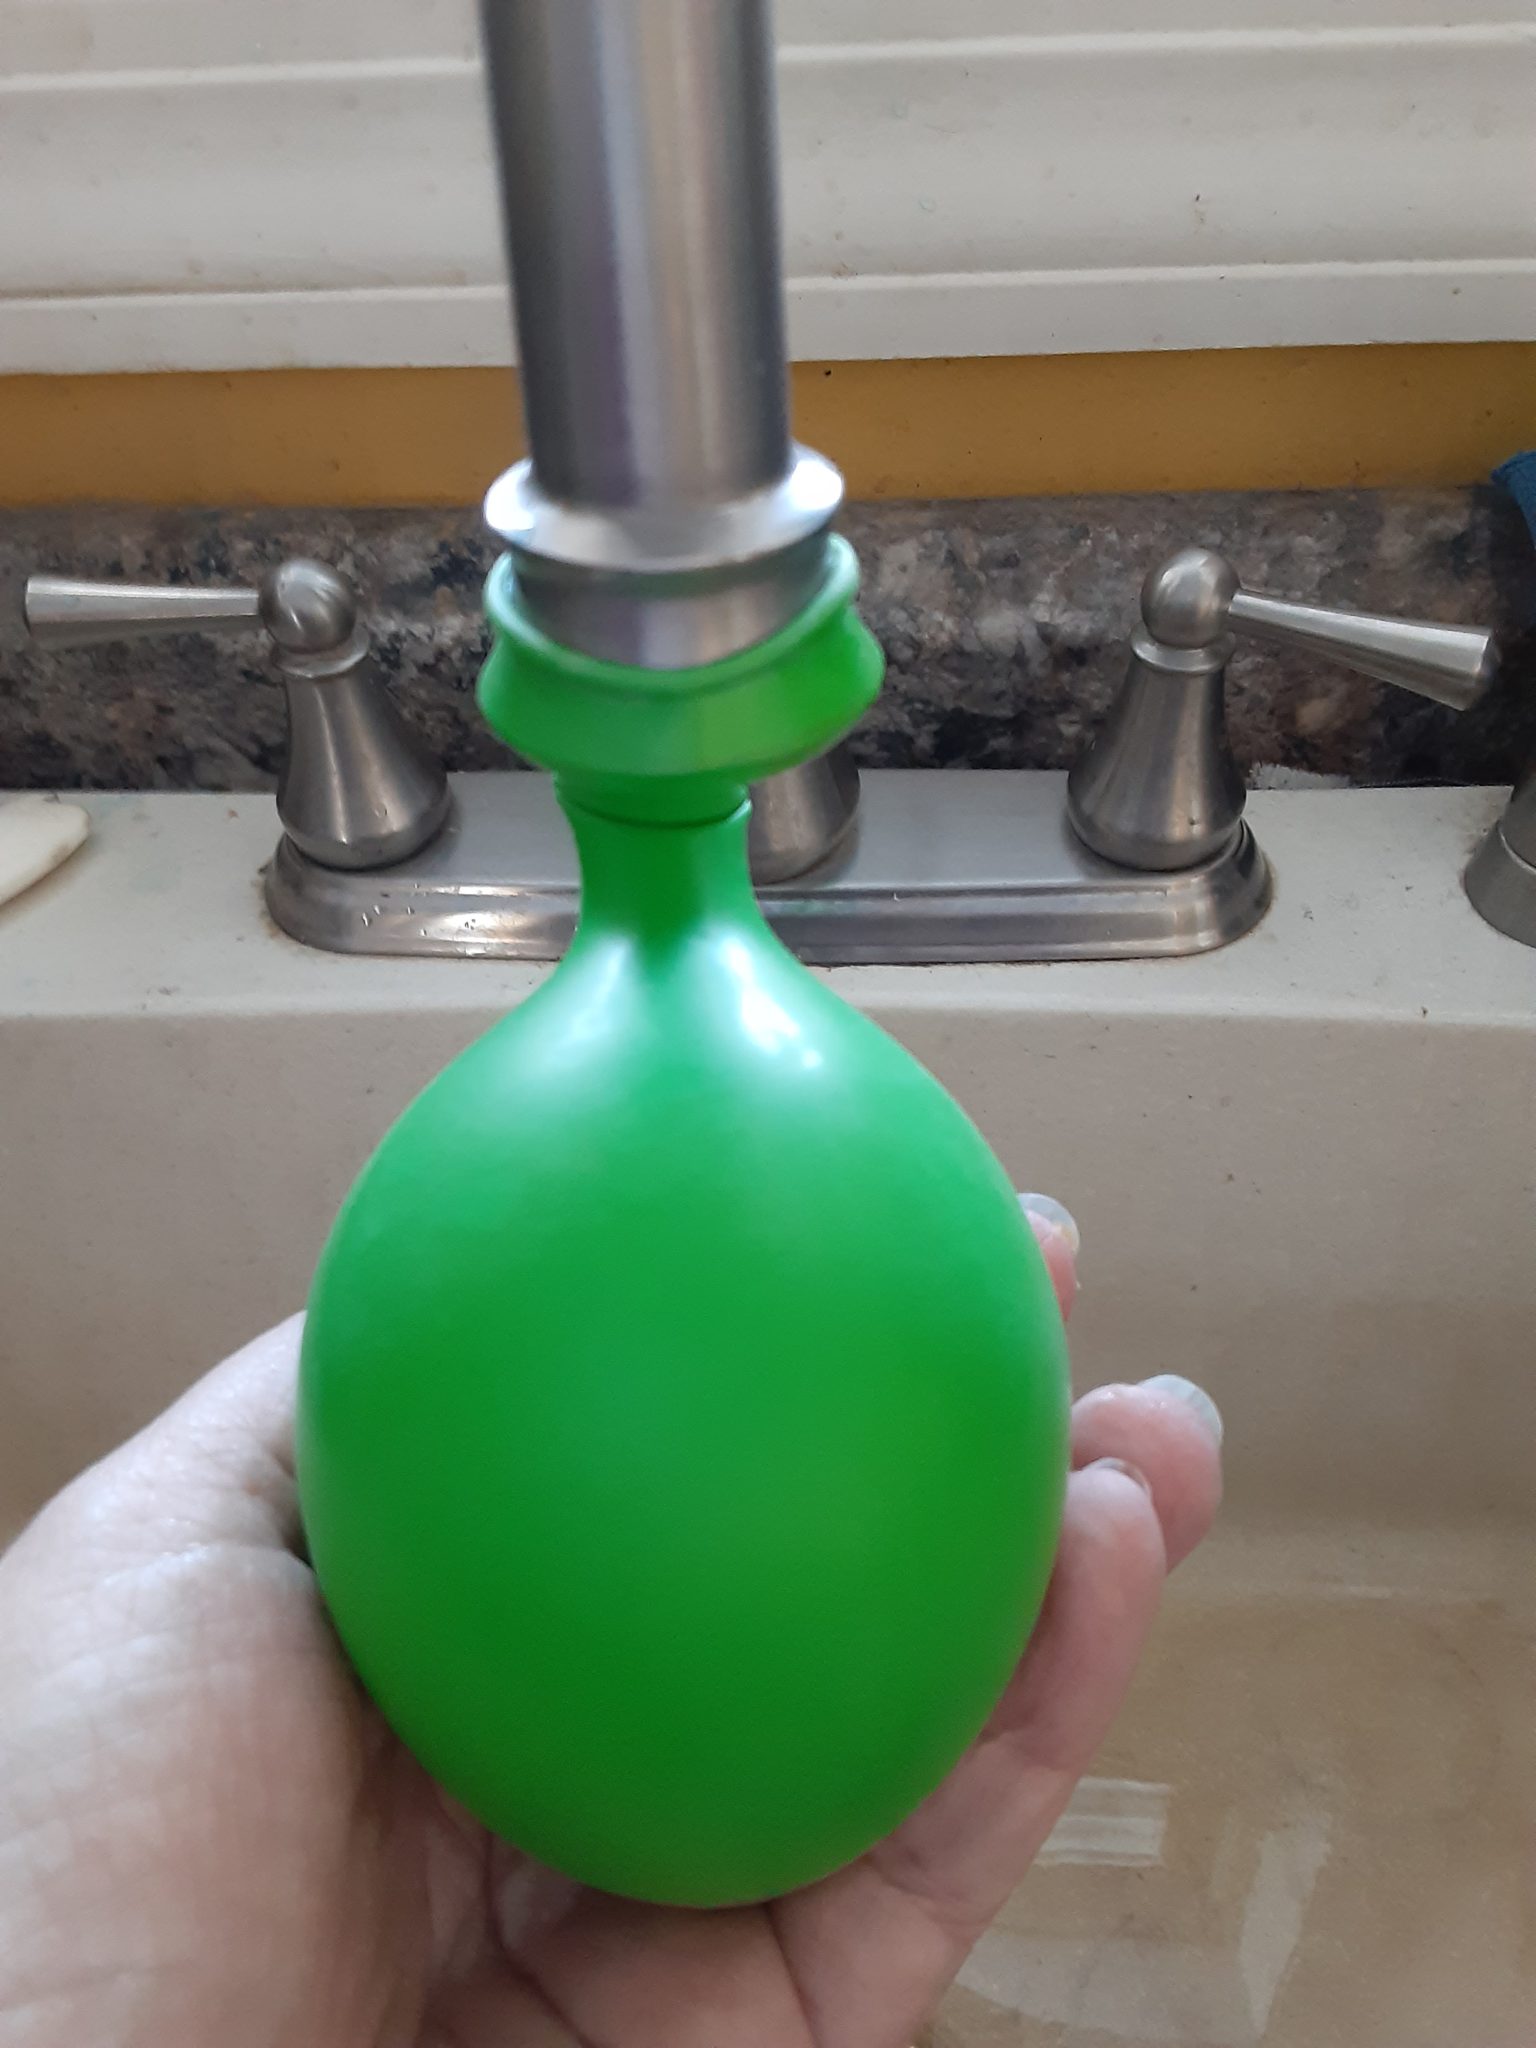 balloon wrapped on faucet head to add water to make the ice balls